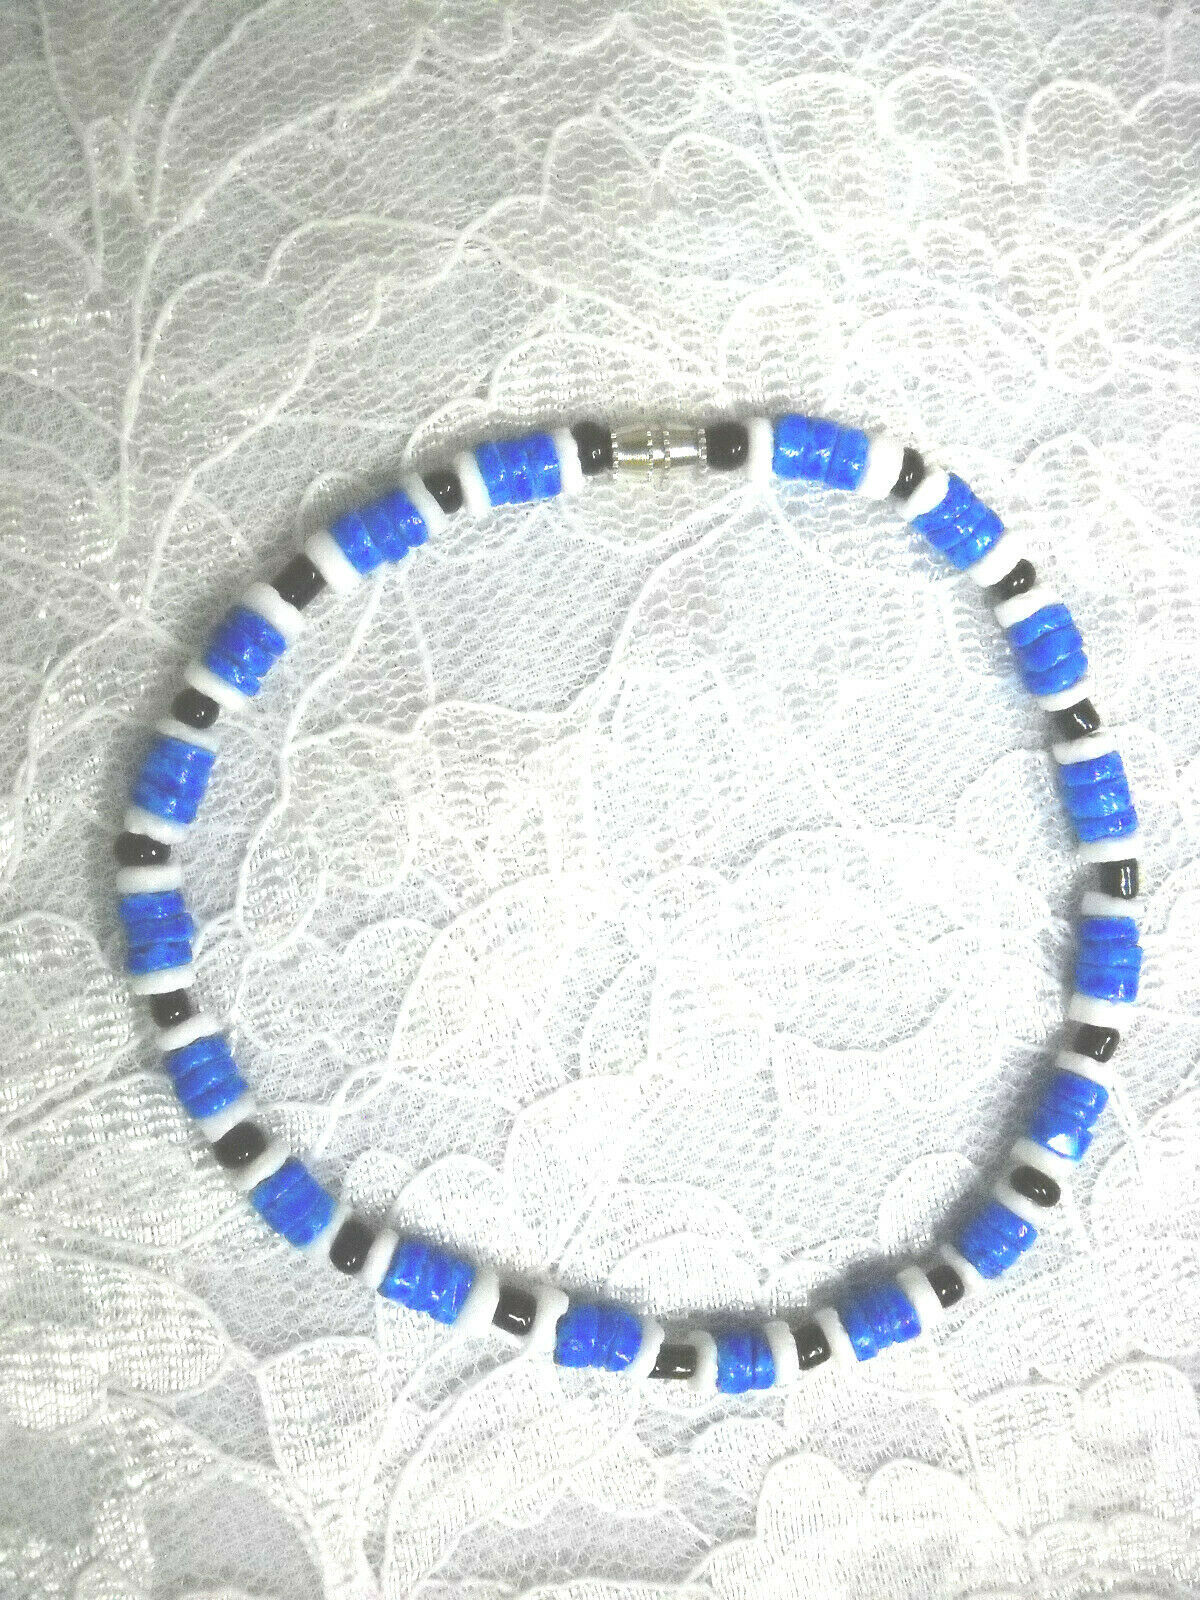 PUKA SHELL BEADS RICH BLUE AND WHITE BLACK GLASS ACCENT BEADS 10 ANKLE BRACELET